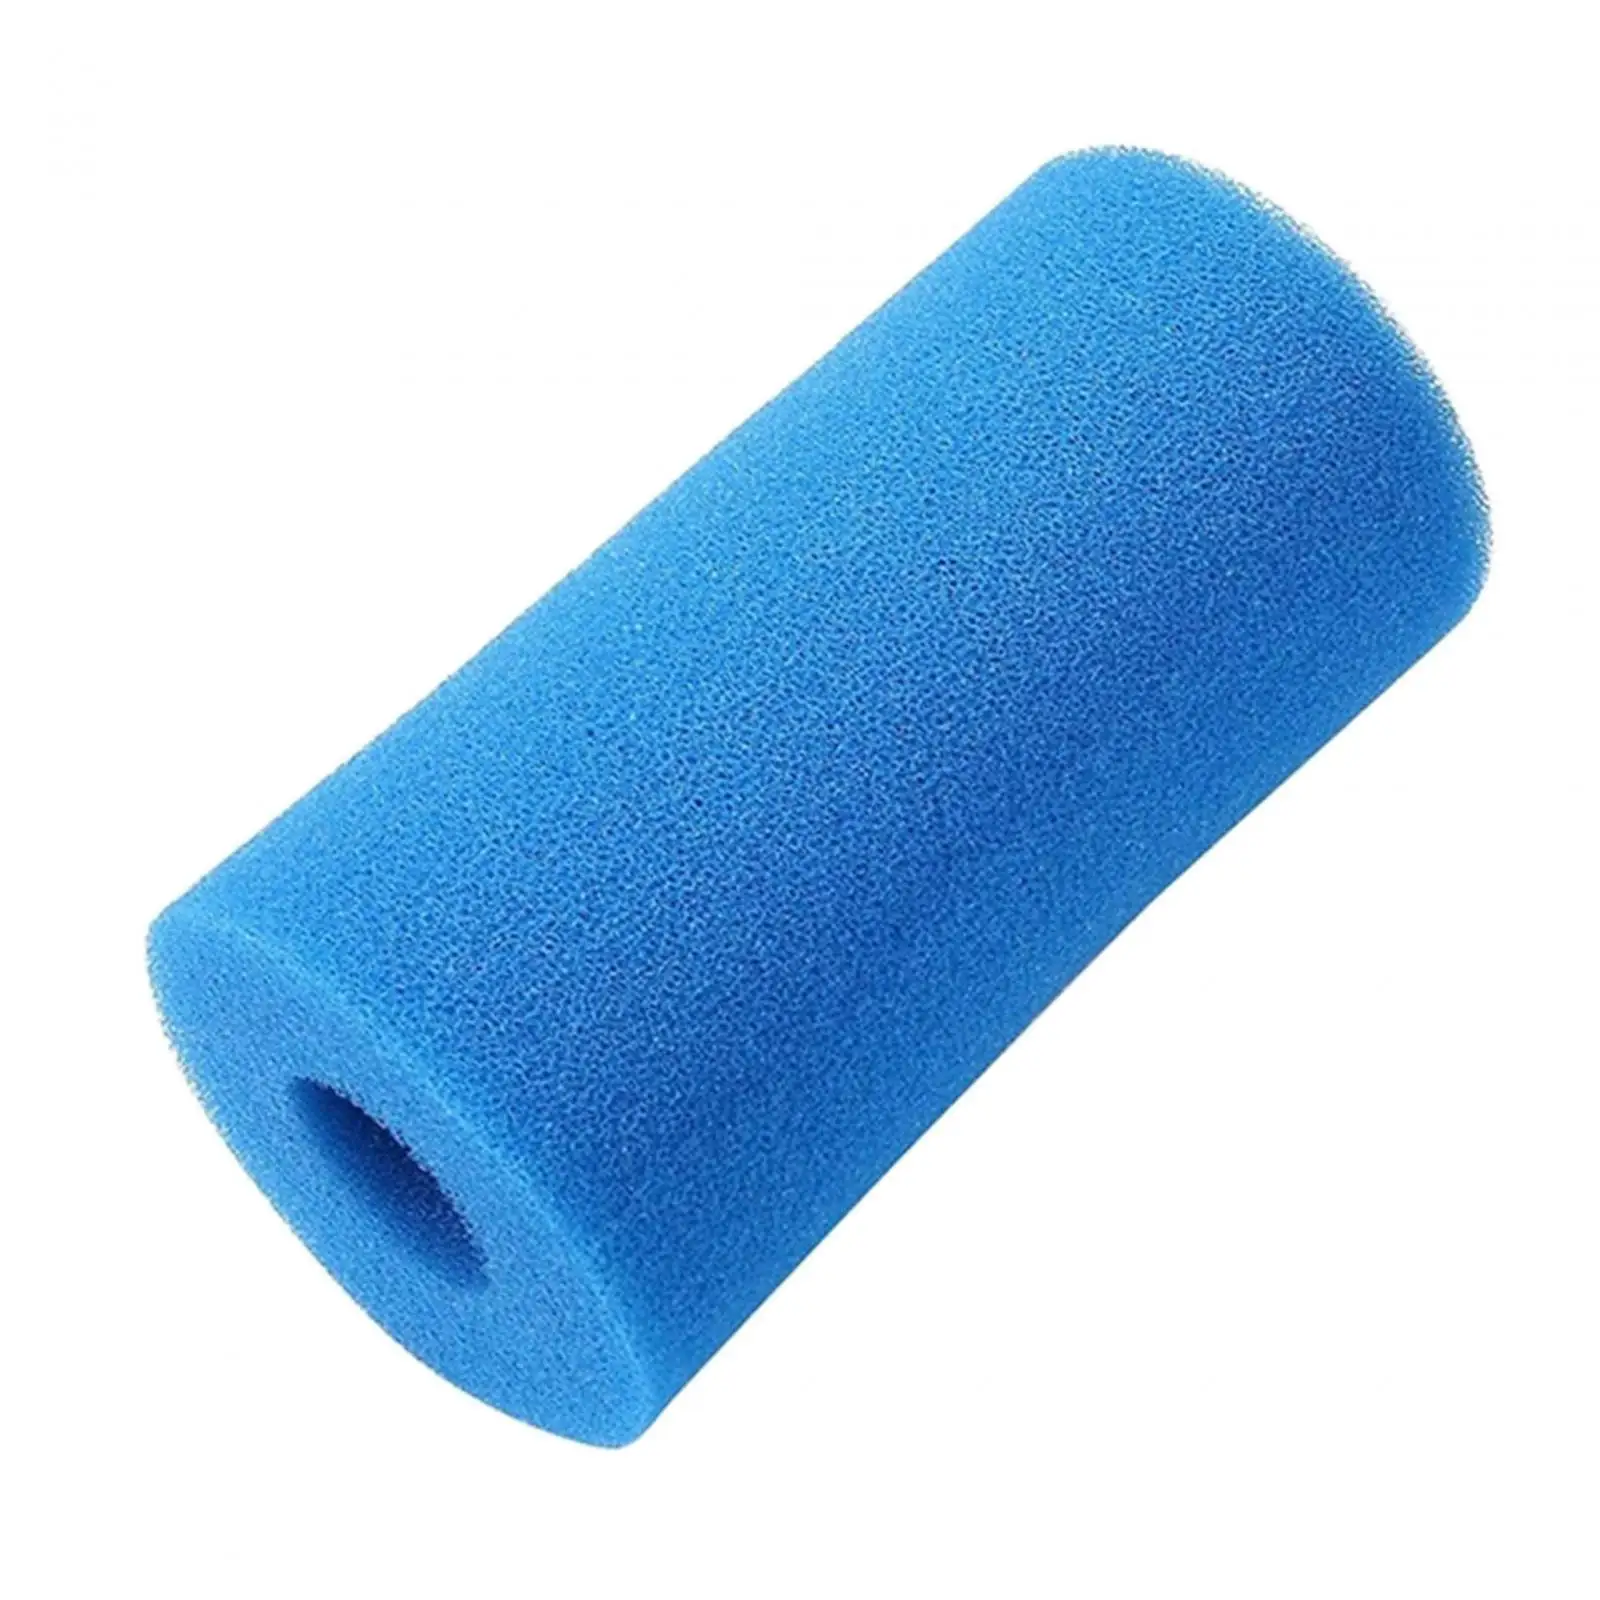 Pool Filter Cartridge Directly Replace Swimming Pool Filter Foam for Type B